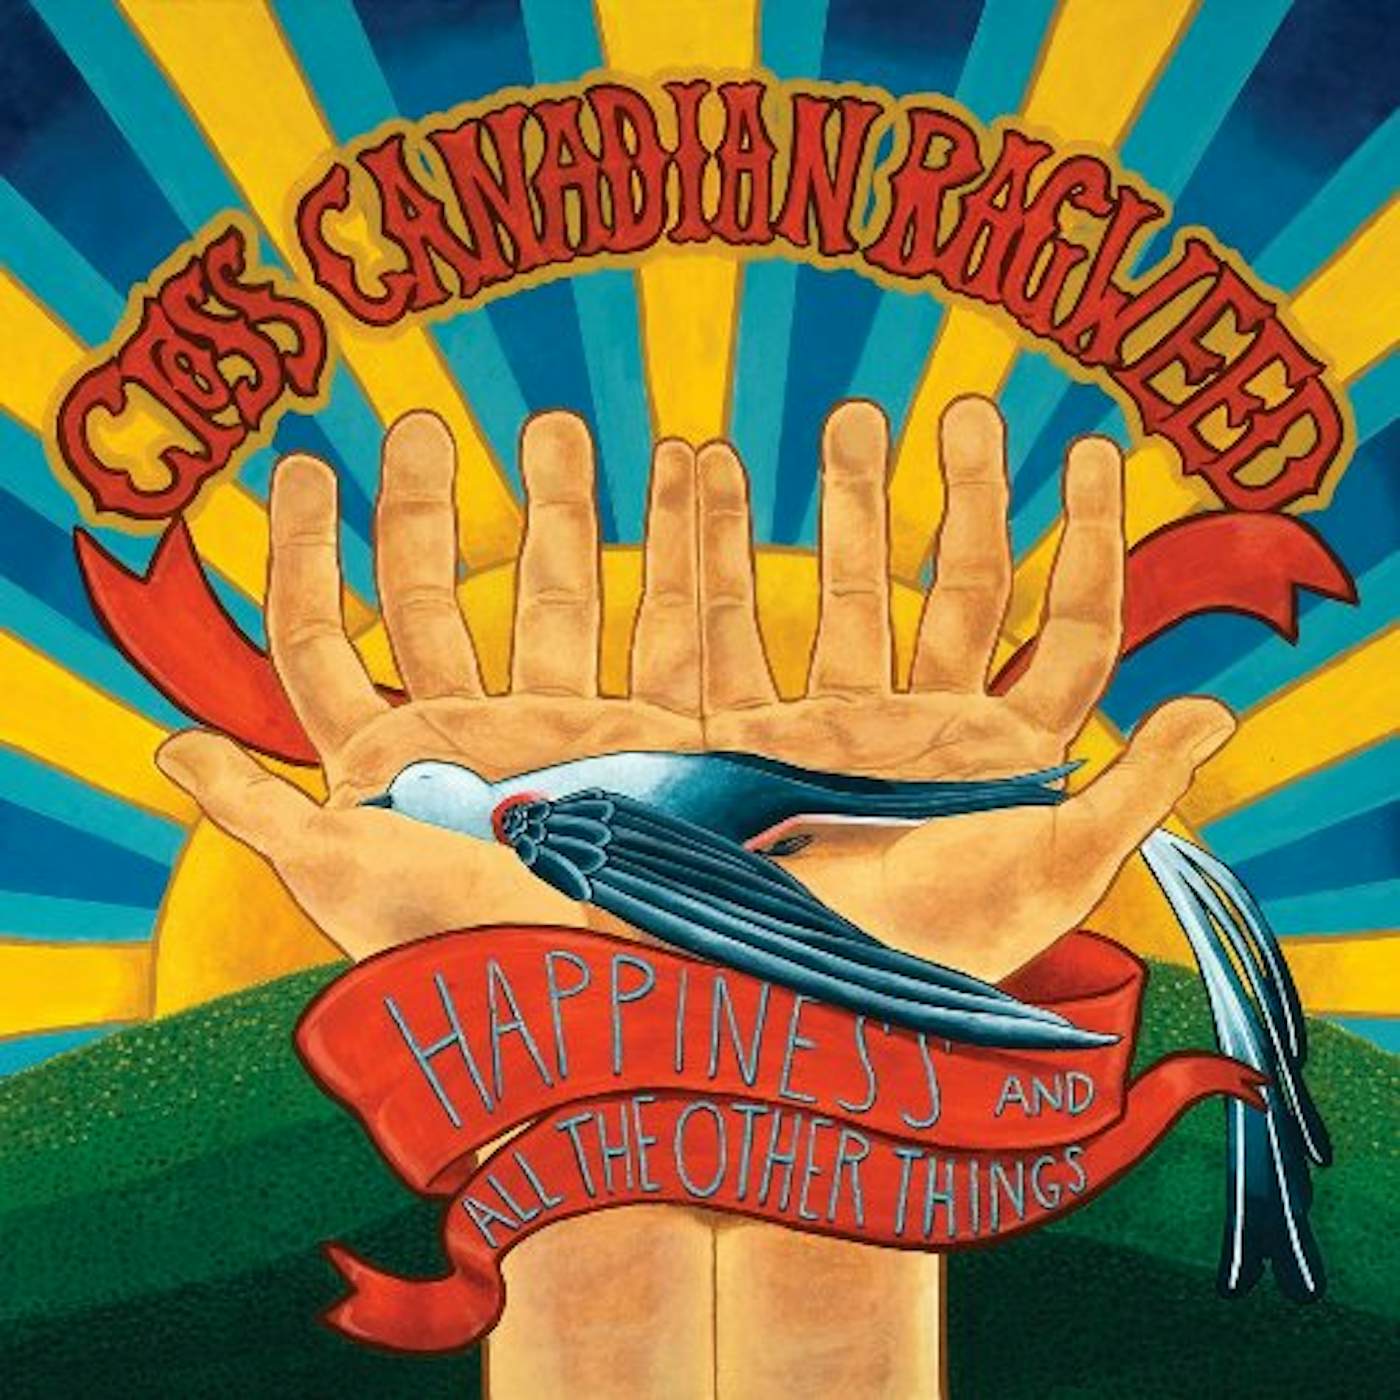 Cross Canadian Ragweed HAPPINESS & ALL THE OTHER THINGS CD